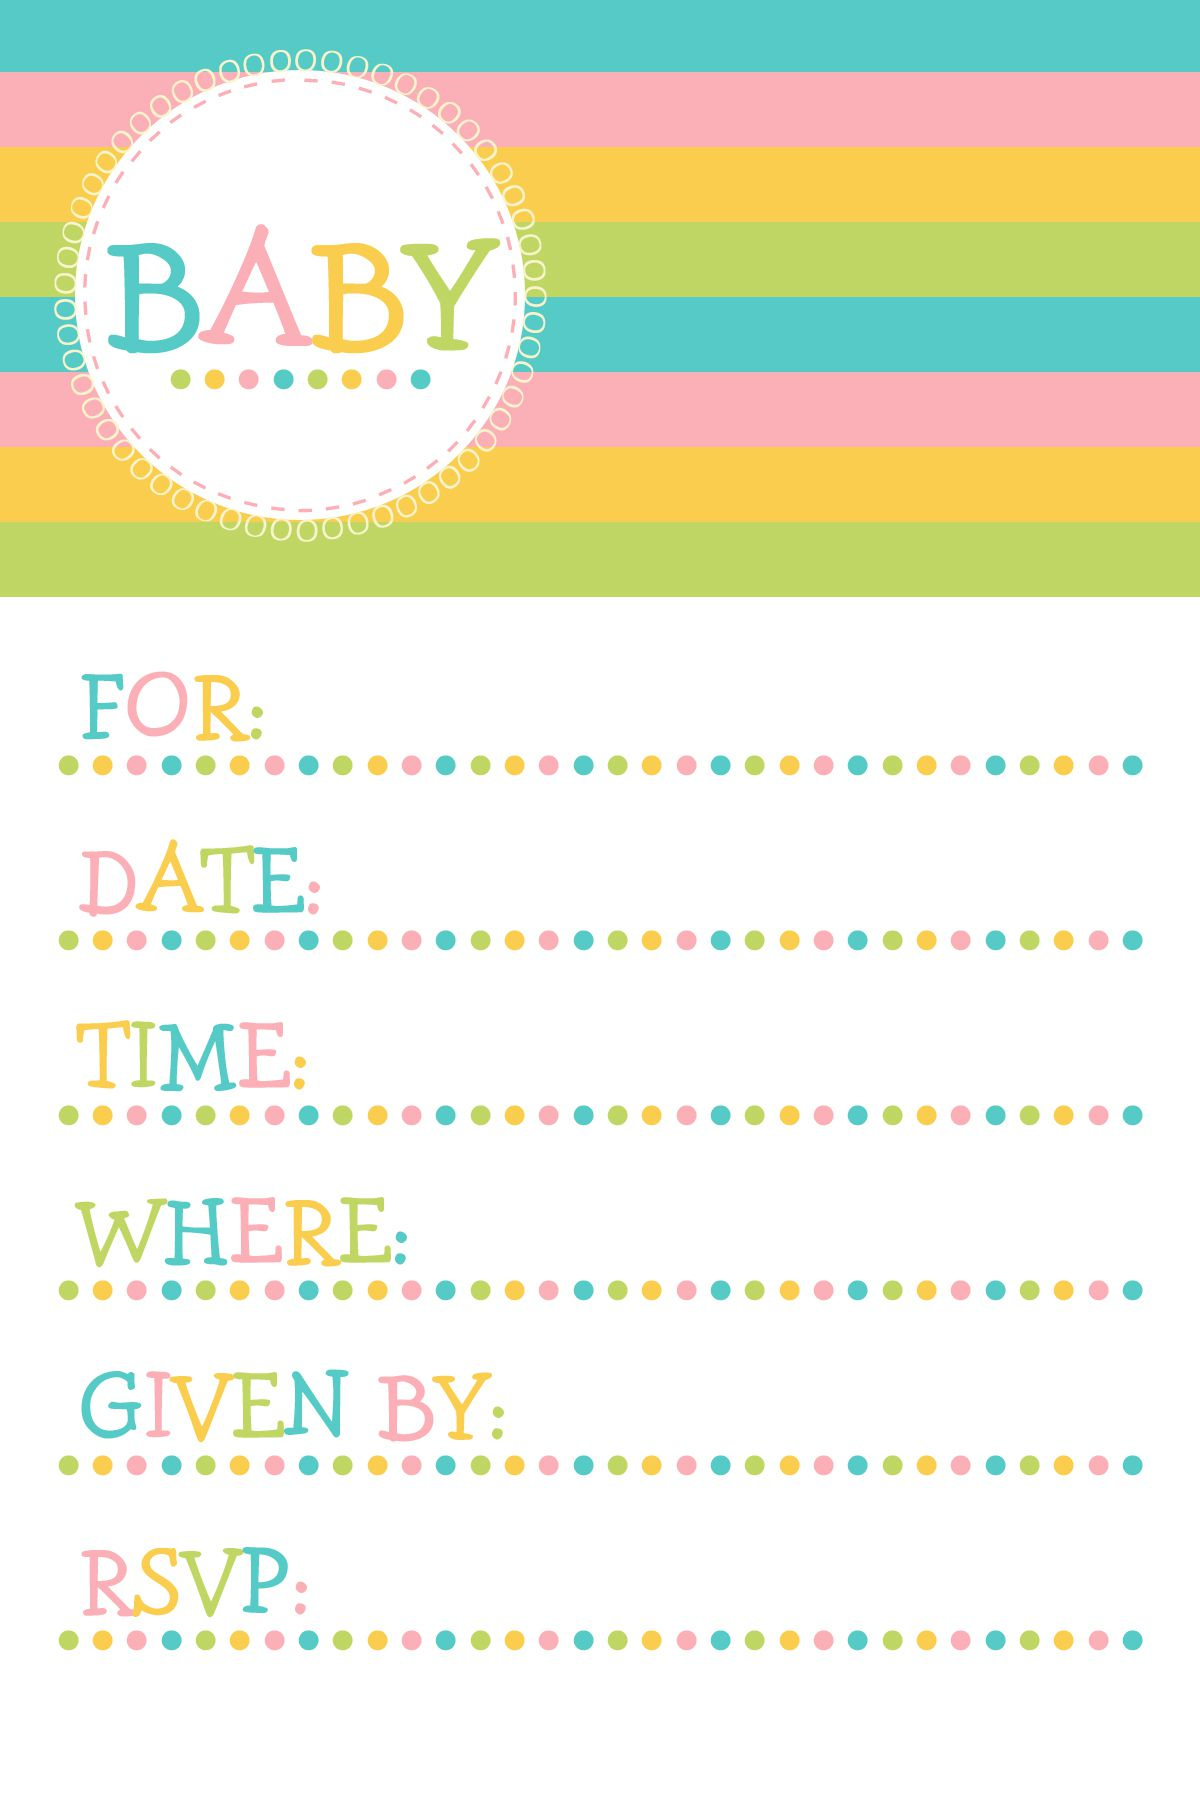 25 Adorable Free Printable Baby Shower Invitations - Free Printable Baby Shower Invitations Templates For Boys